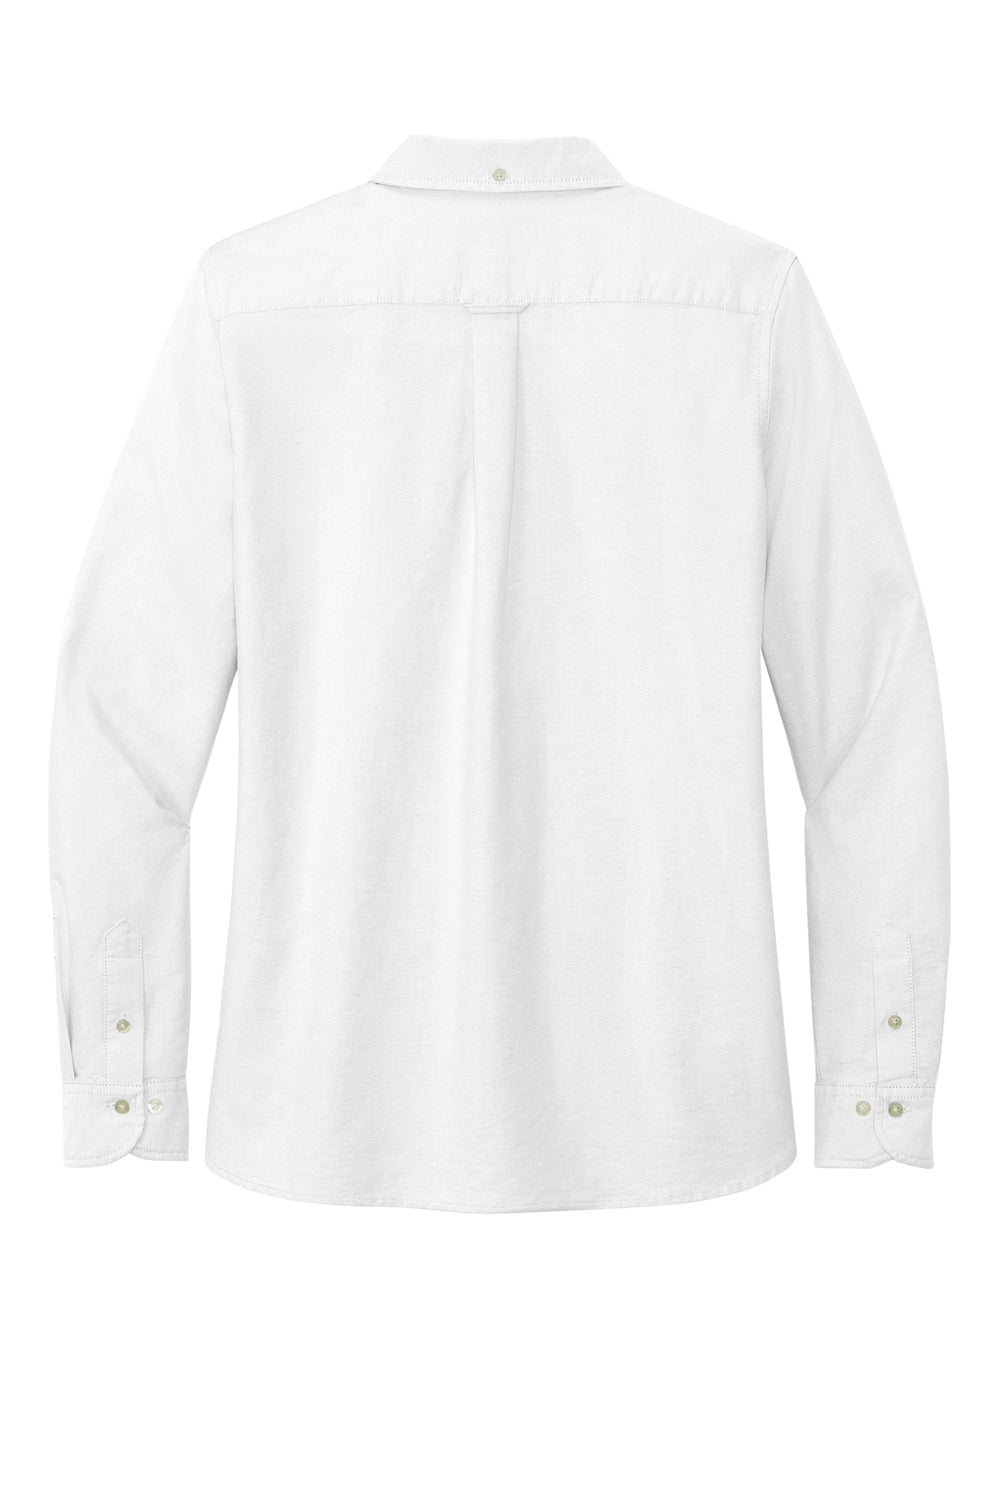 Brooks Brothers Womens Casual Oxford Long Sleeve Button Down Shirt White Flat Back